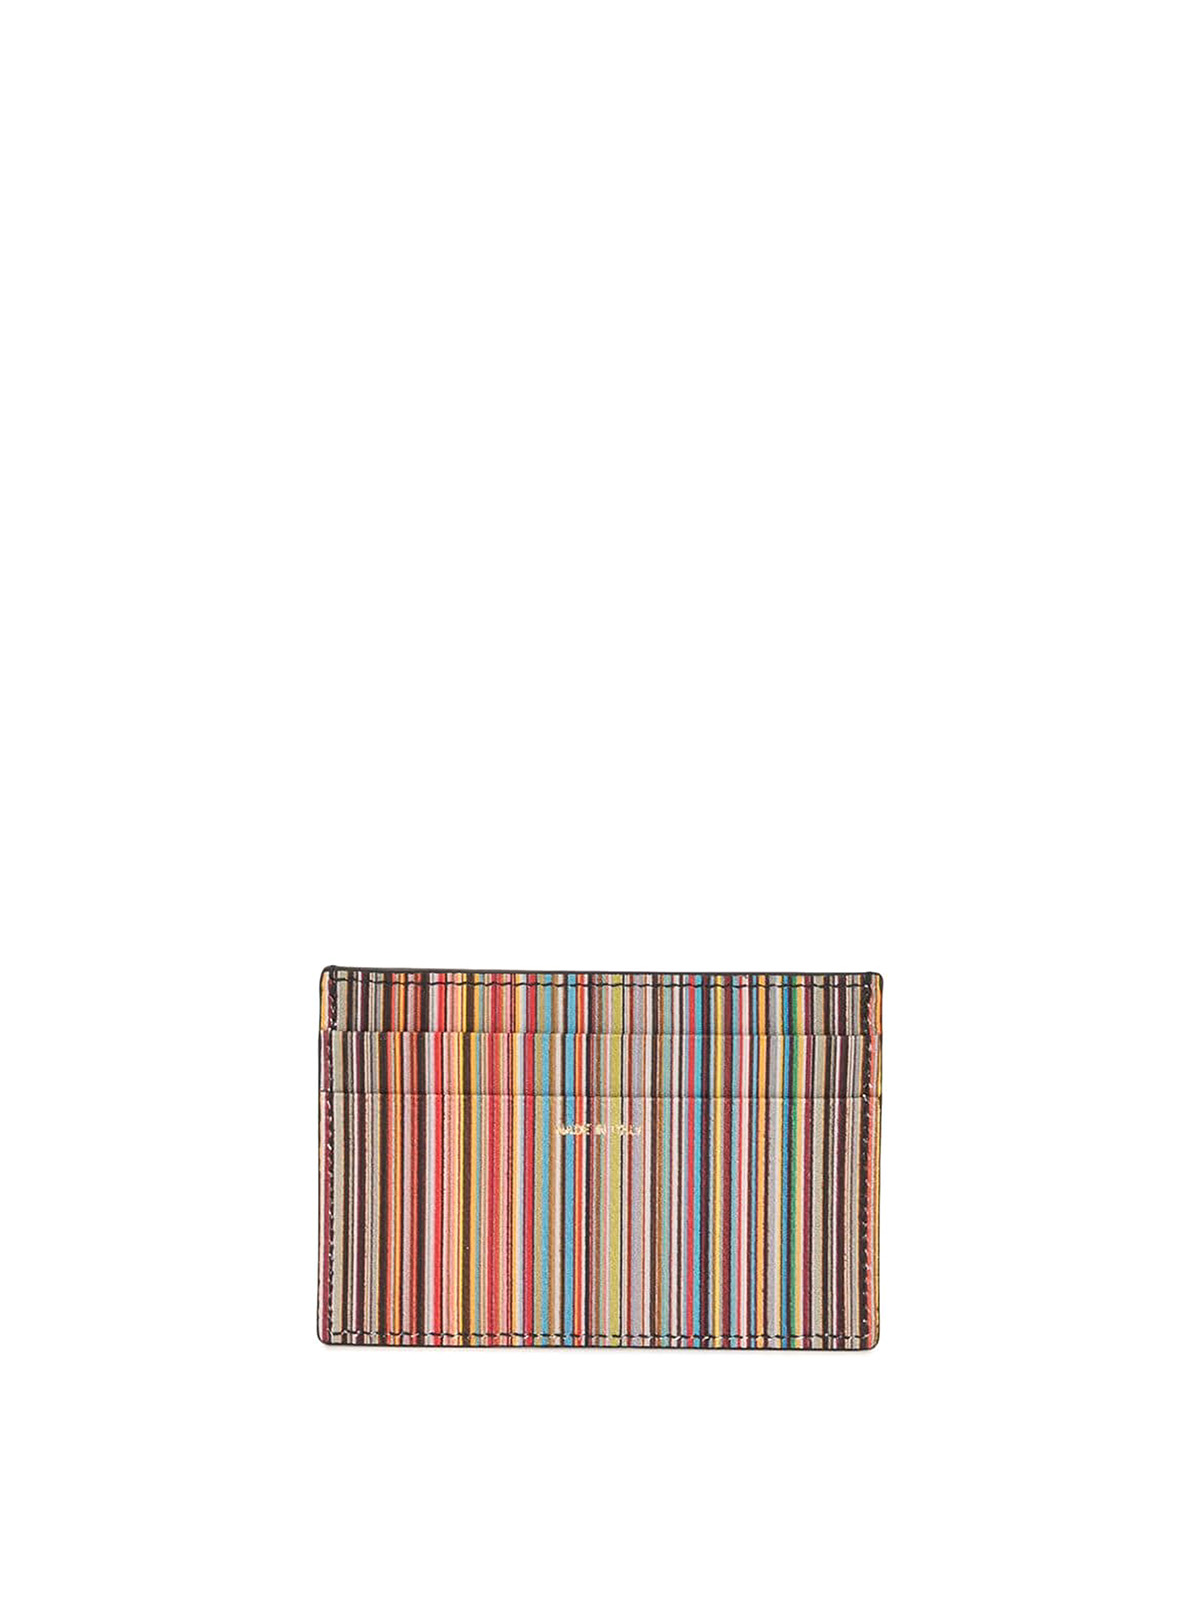 Shop Paul Smith Leather Cardholder In Black